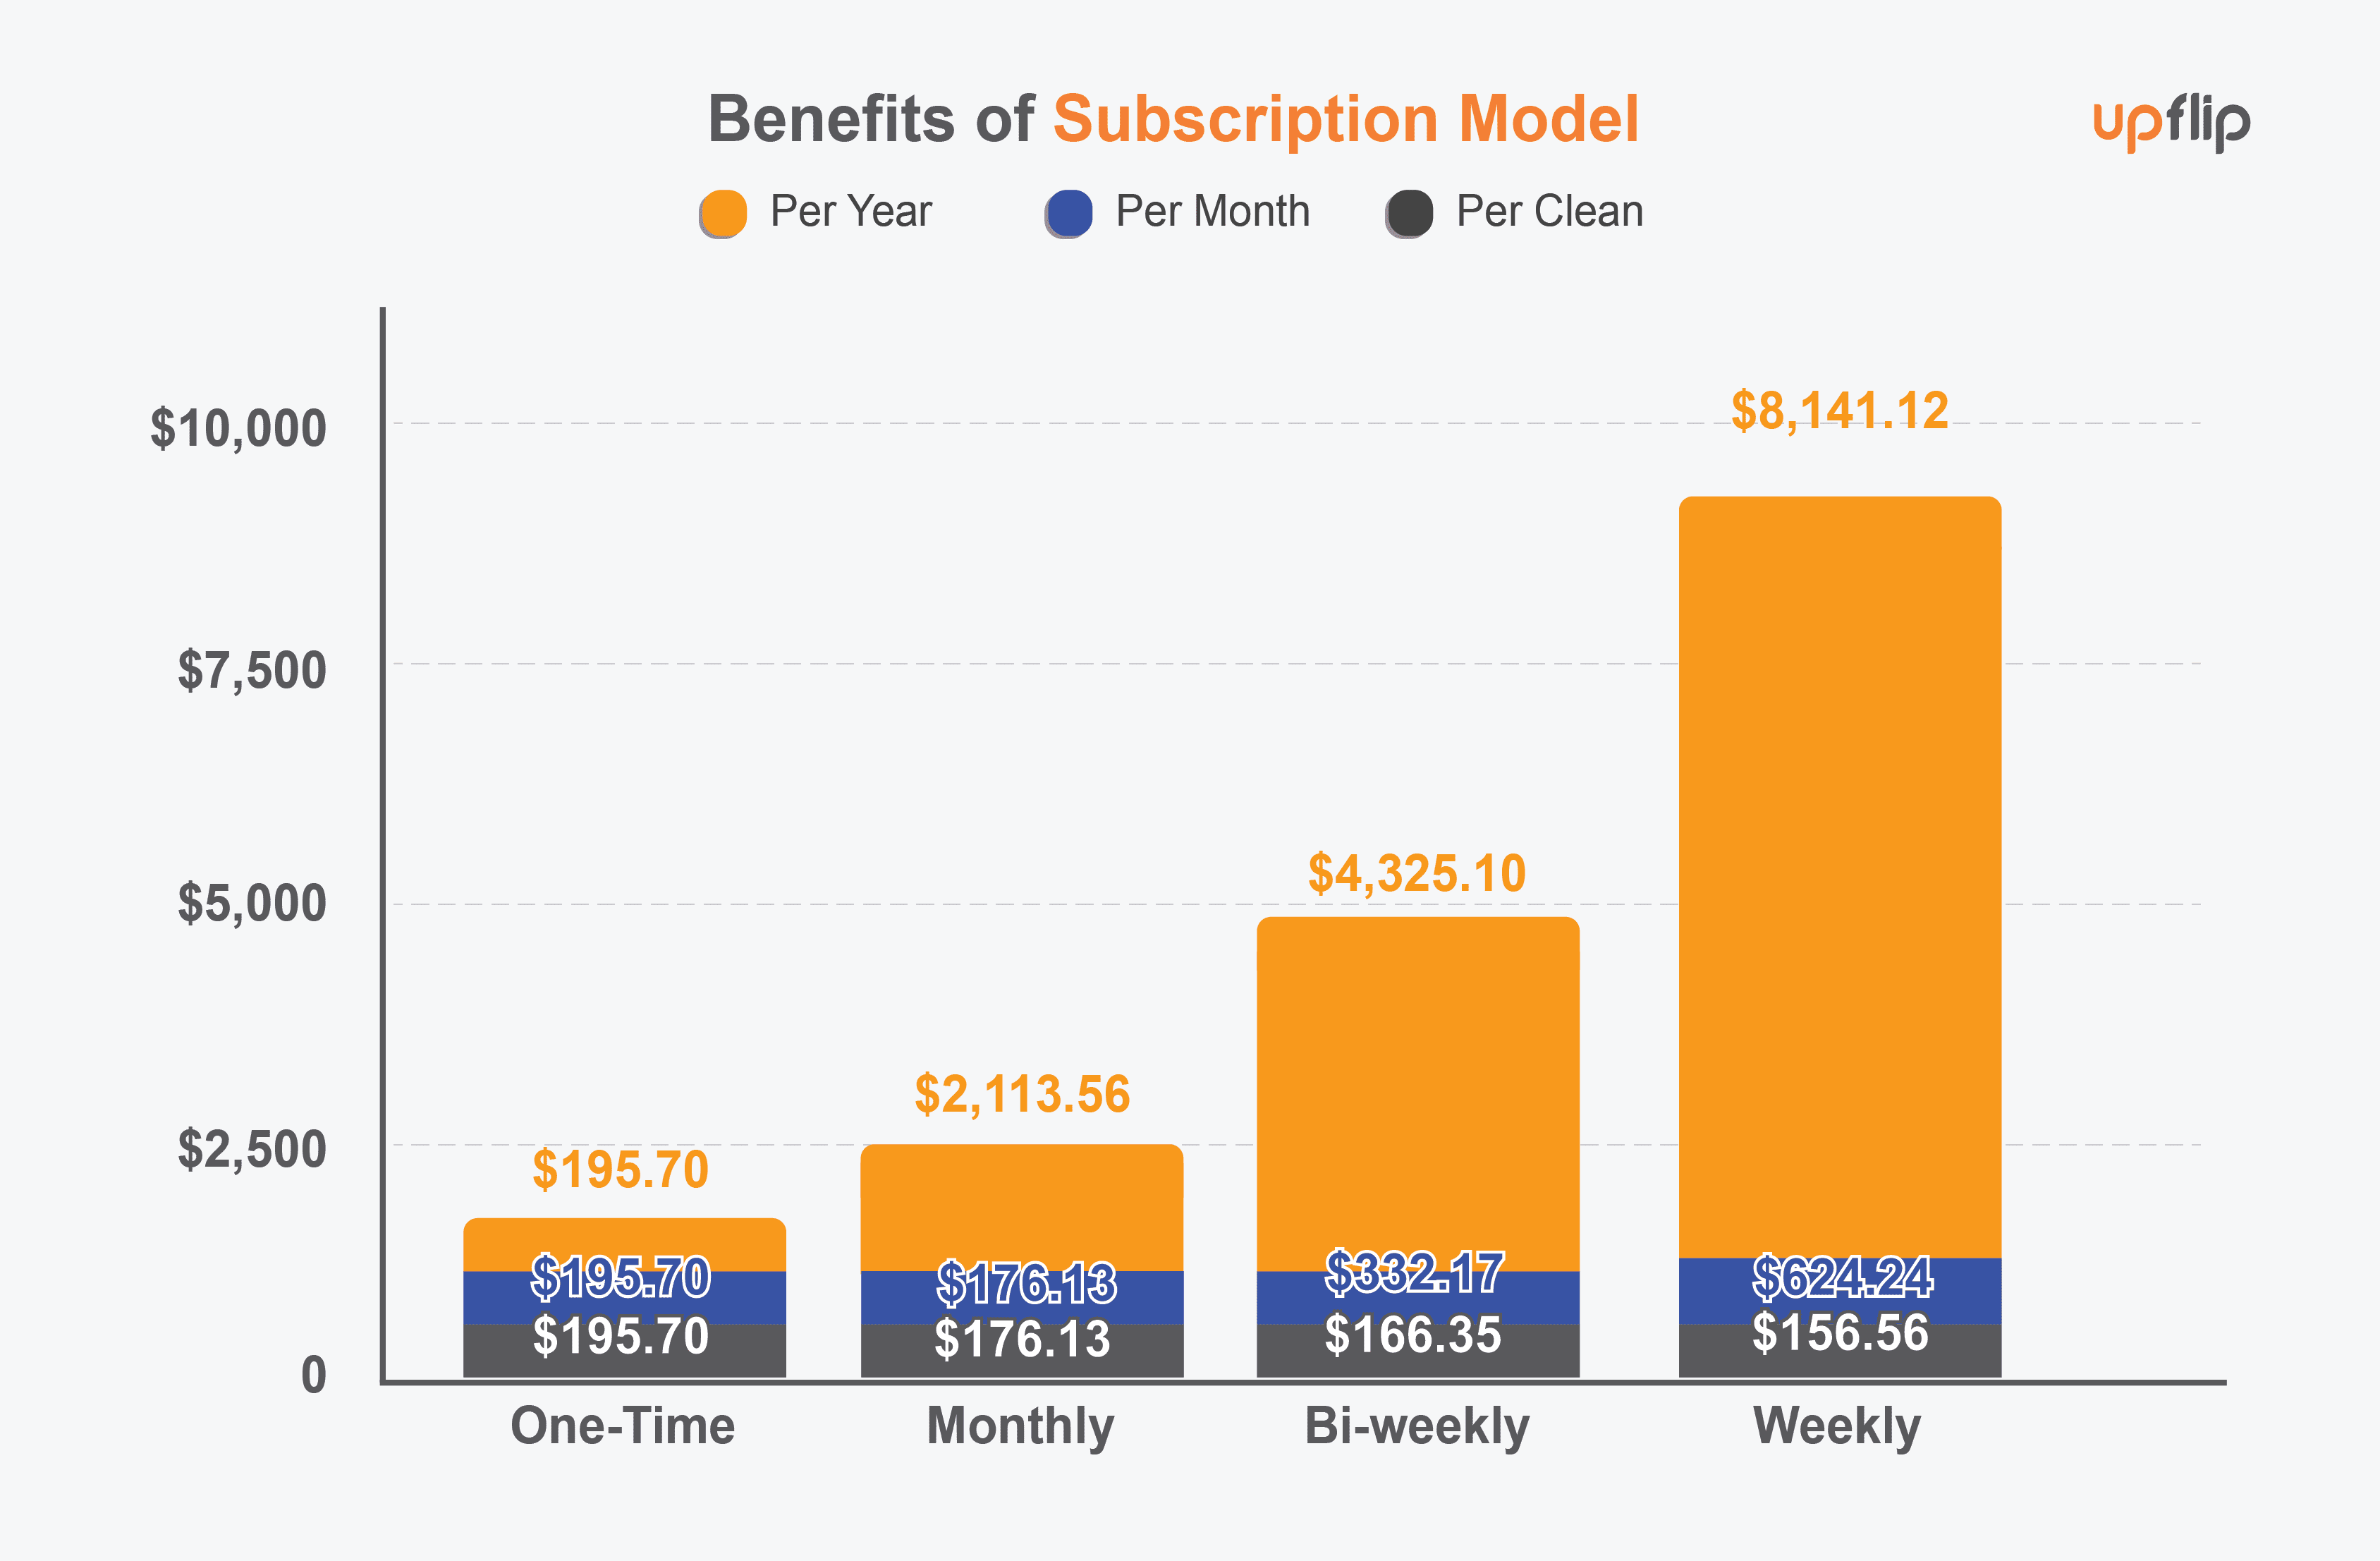 House cleaning subscription model breakdown